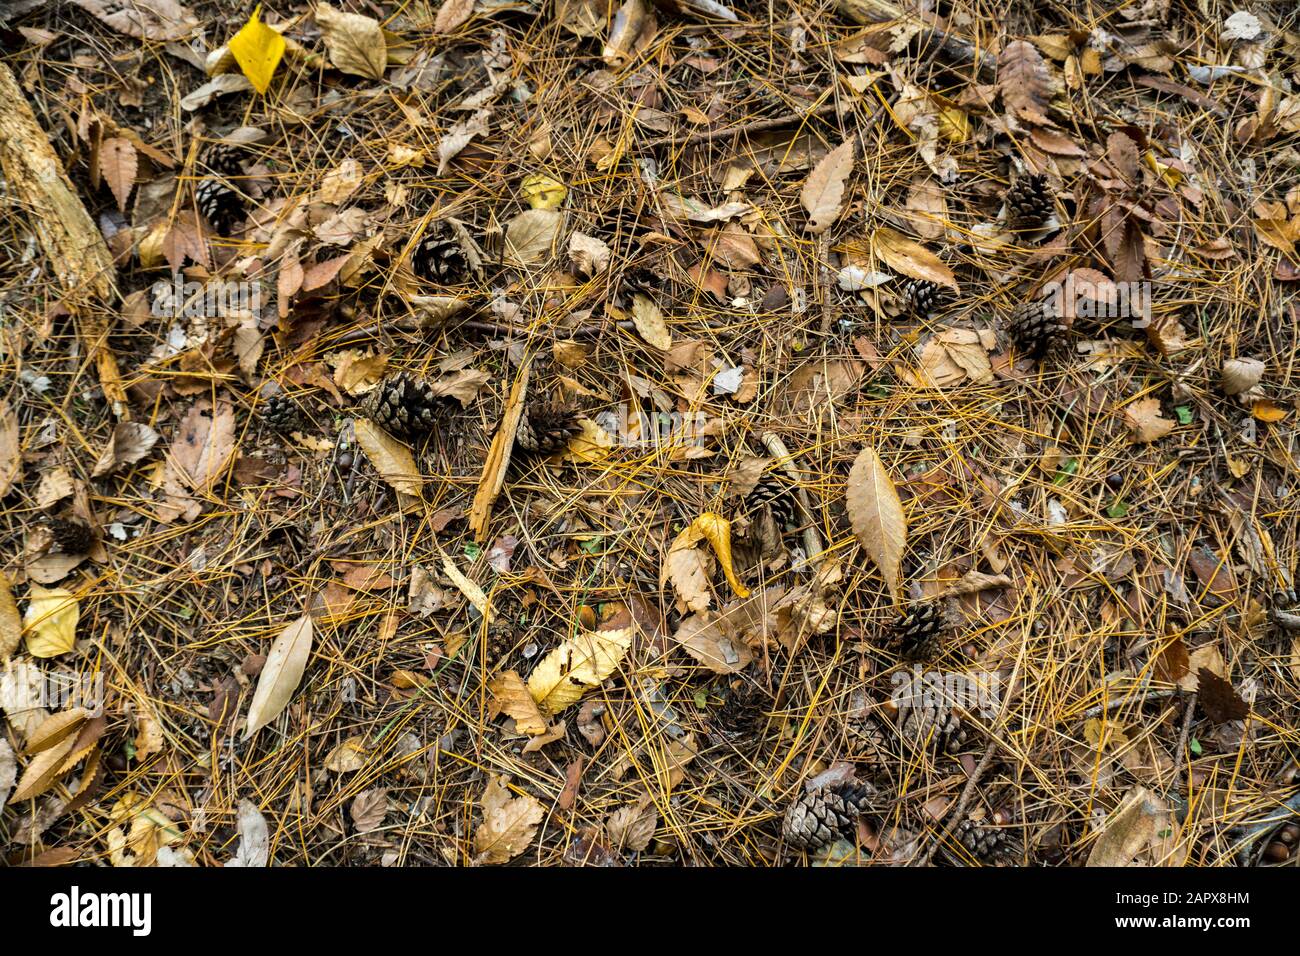 Brown pine cones with fallen withered leaves strewn on the ground Stock Photo